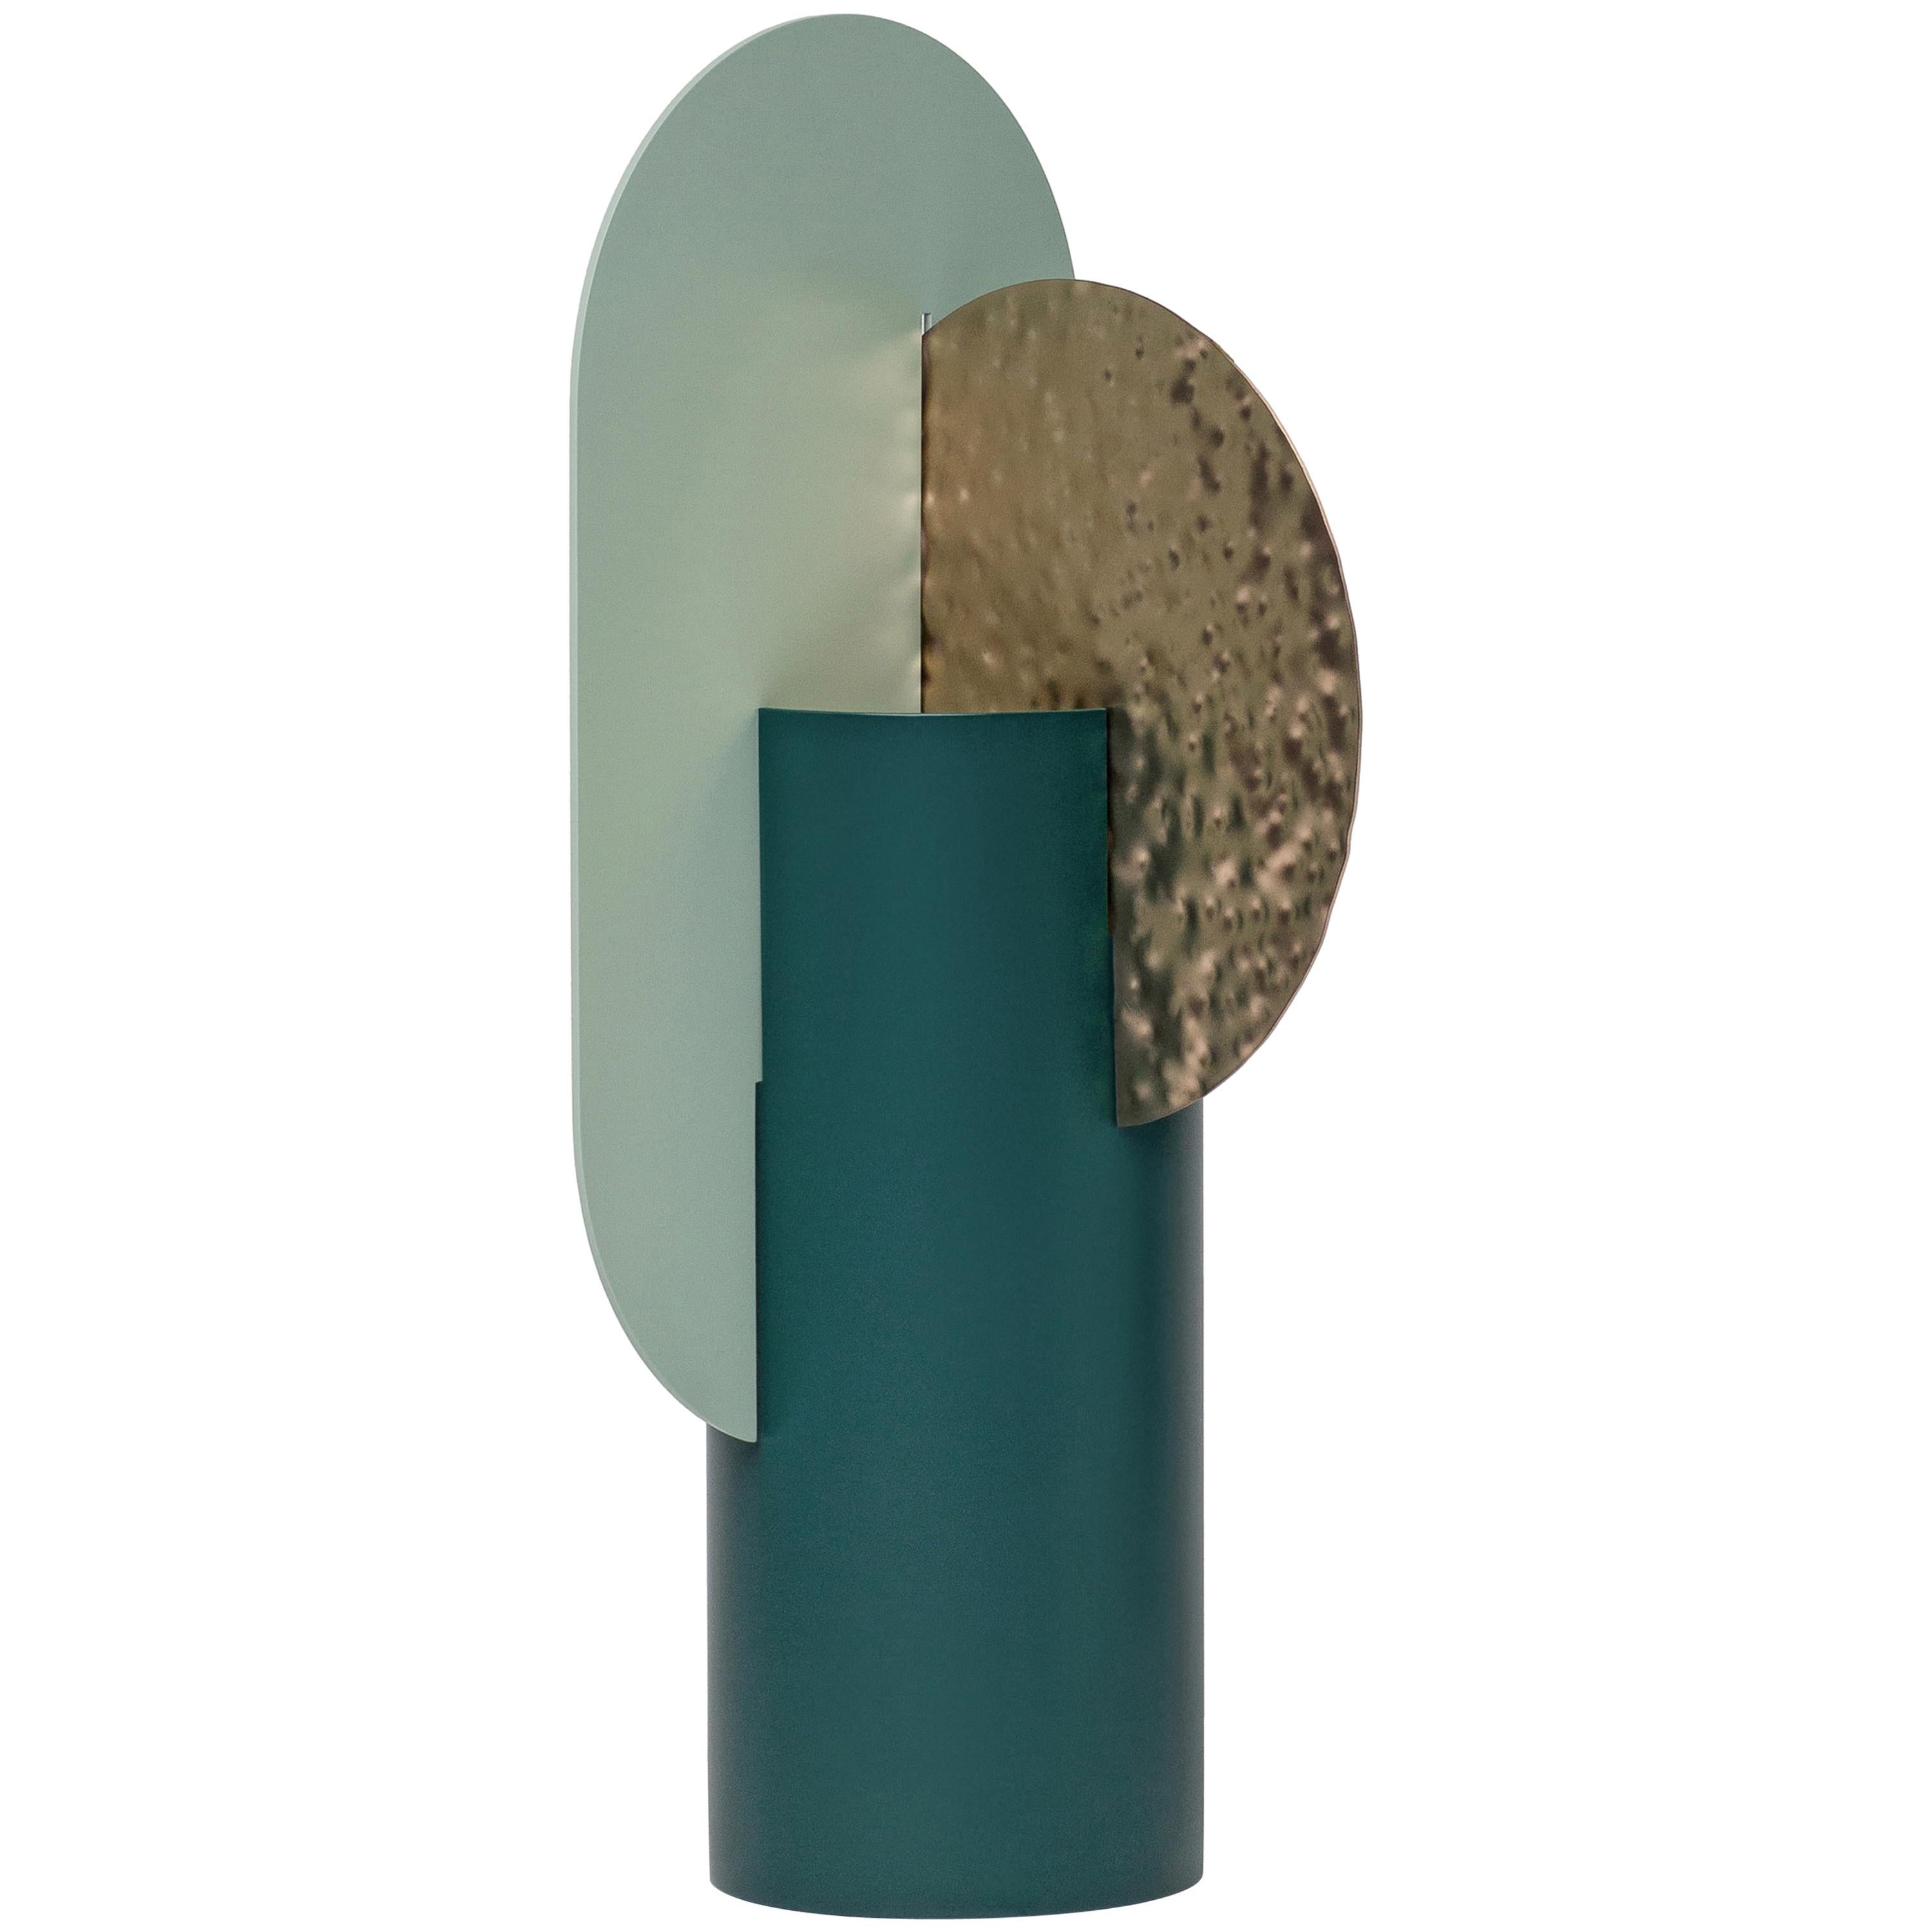 Limited Edition Modern Vase Yermilov CSL3 by NOOM in Hammered Brass and Steel